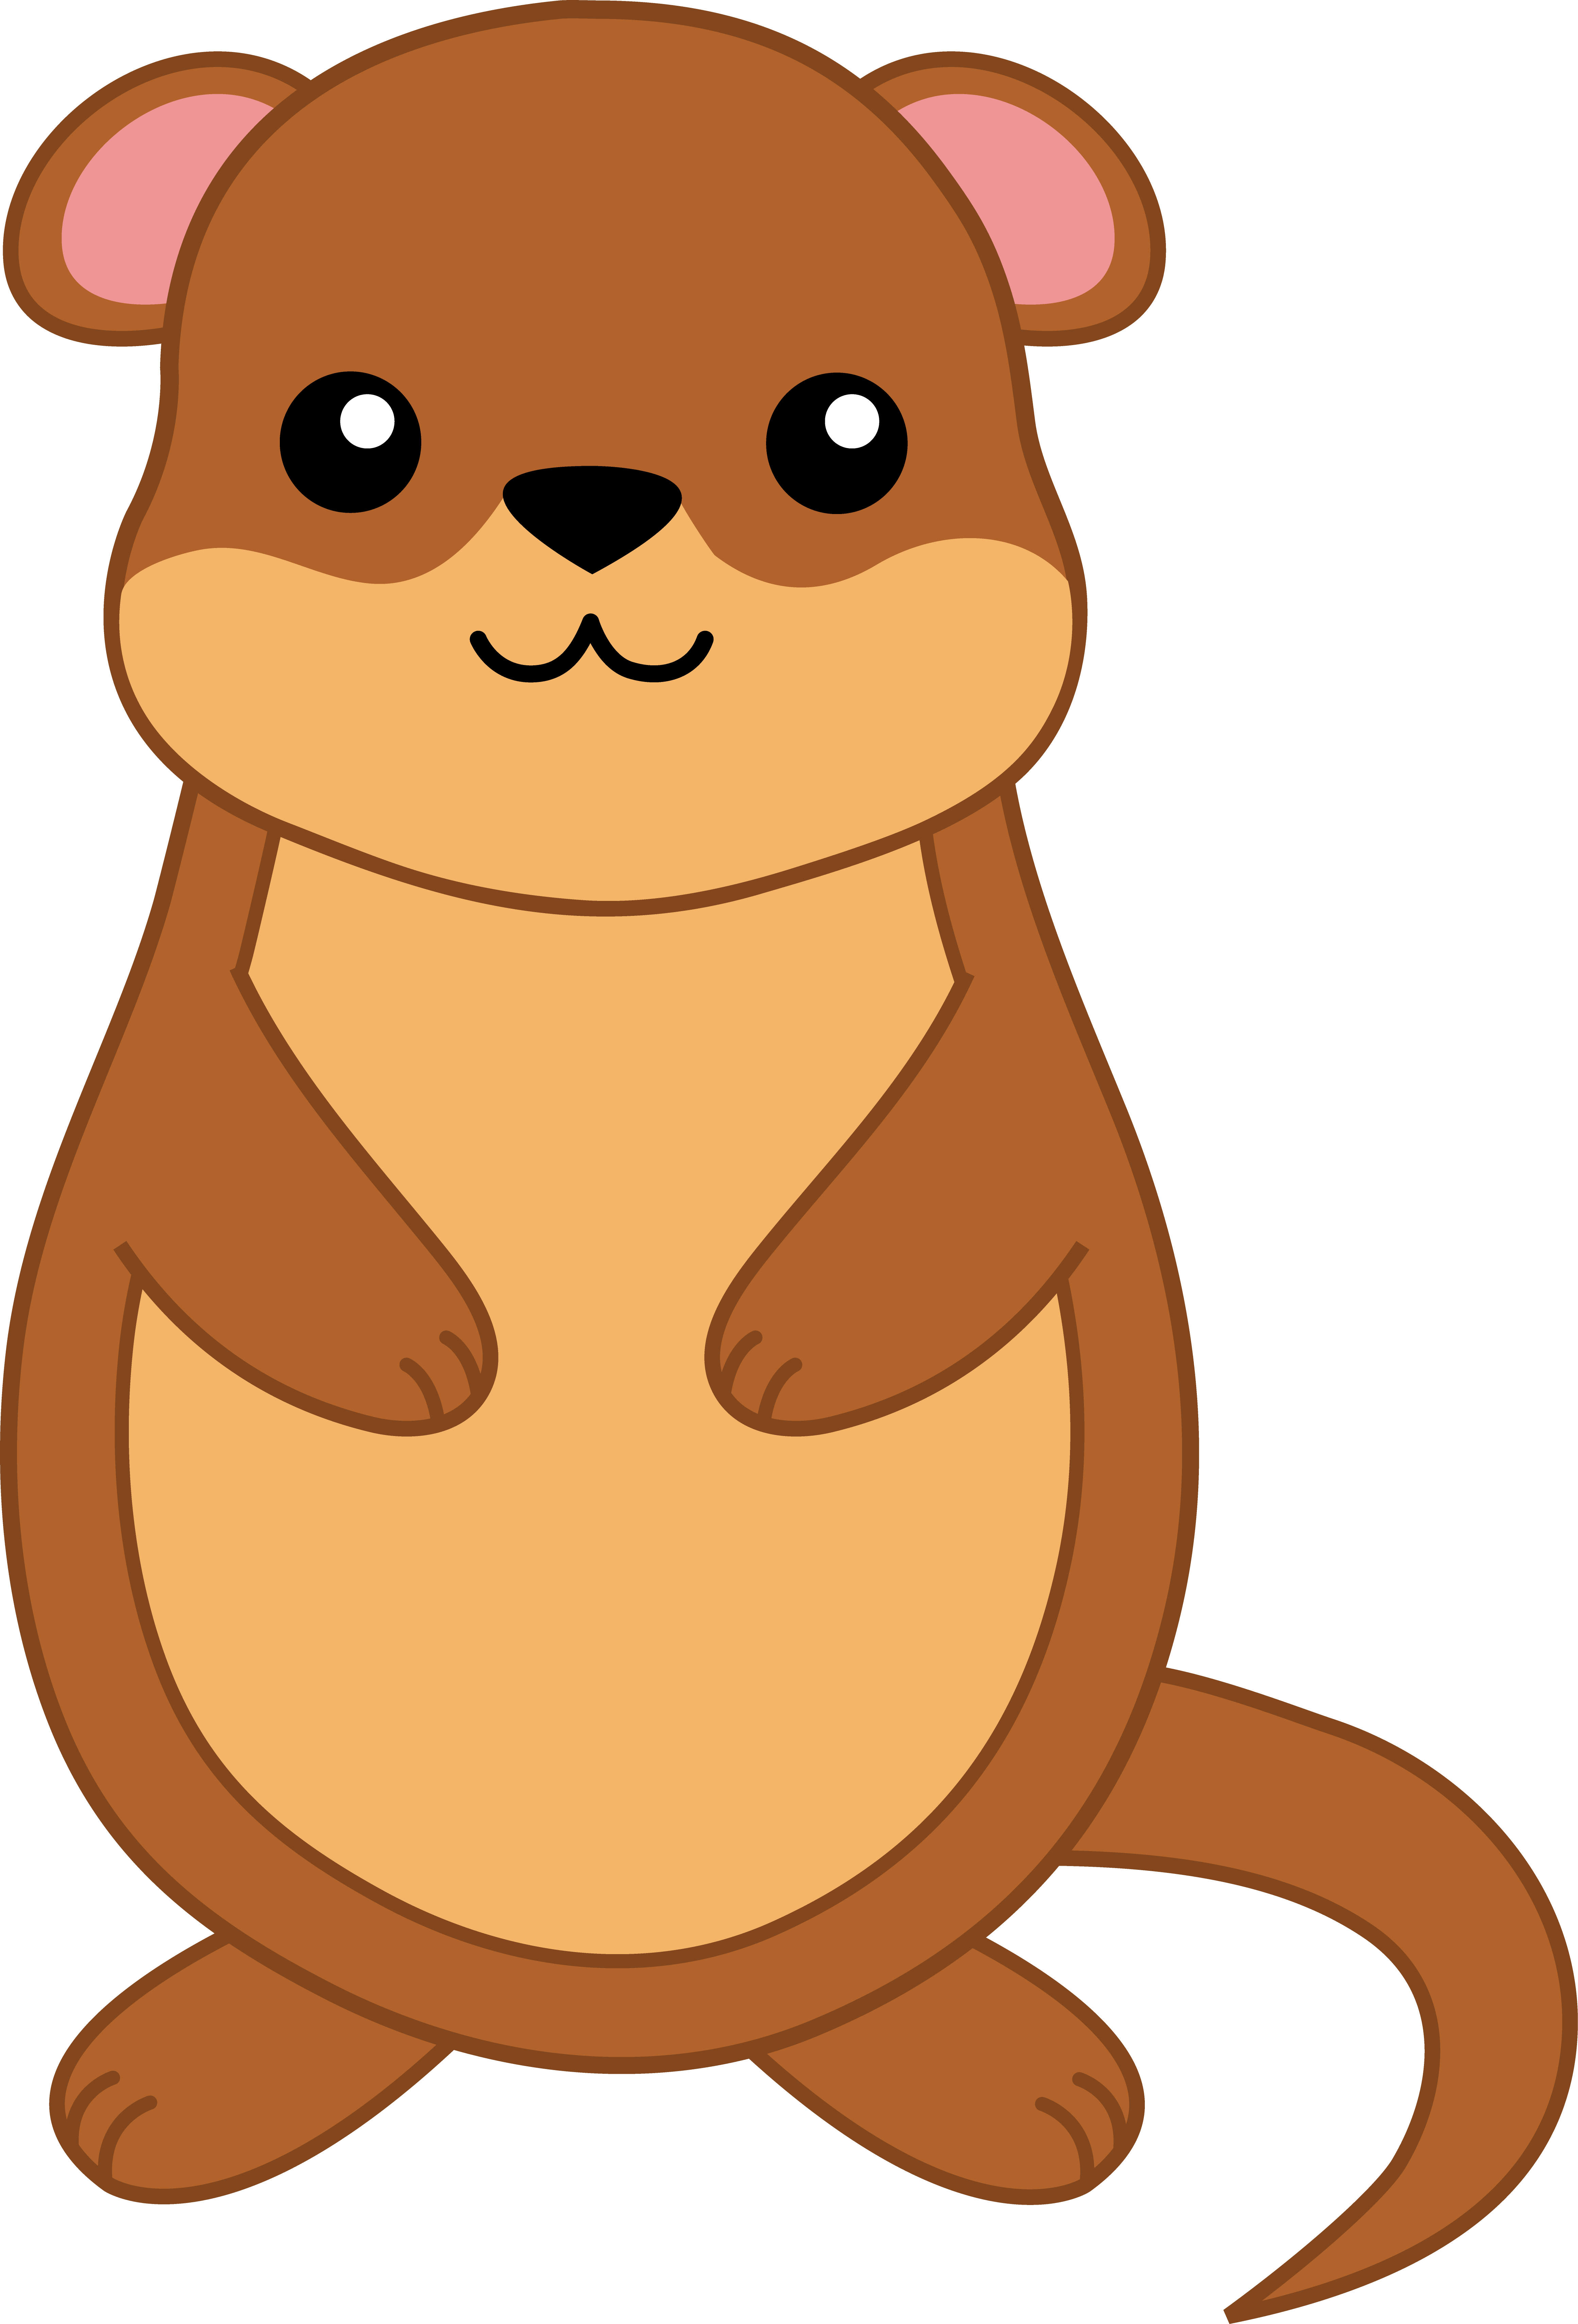 Clipart squirrel animated. Cute groundhog free clip